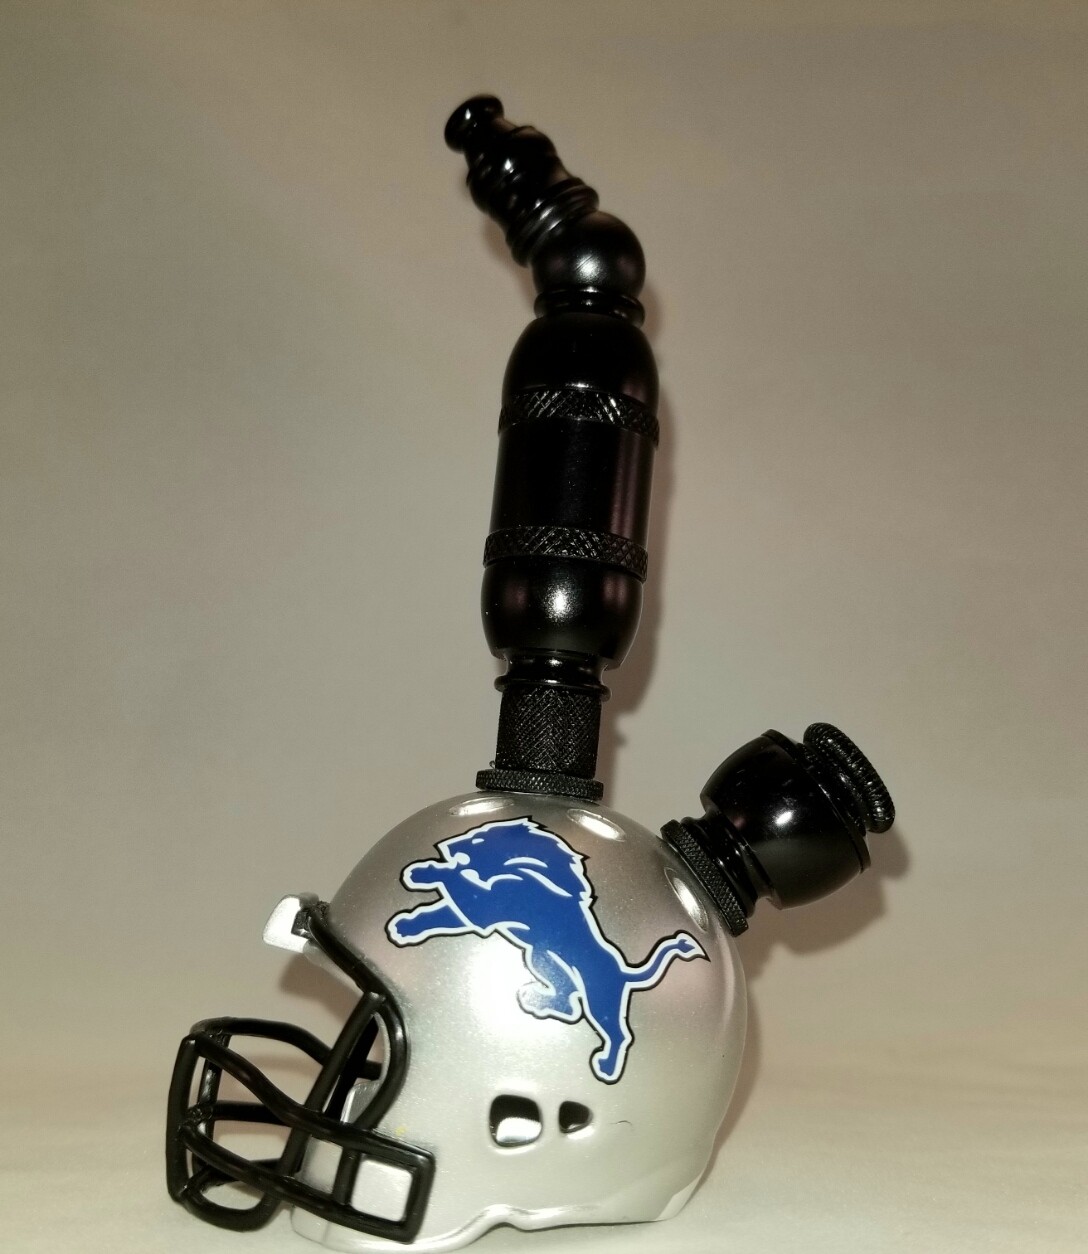 DETROIT LIONS "BAD ASS" NFL FOOTBALL HELMET SMOKING PIPE Upright/Black Anodized